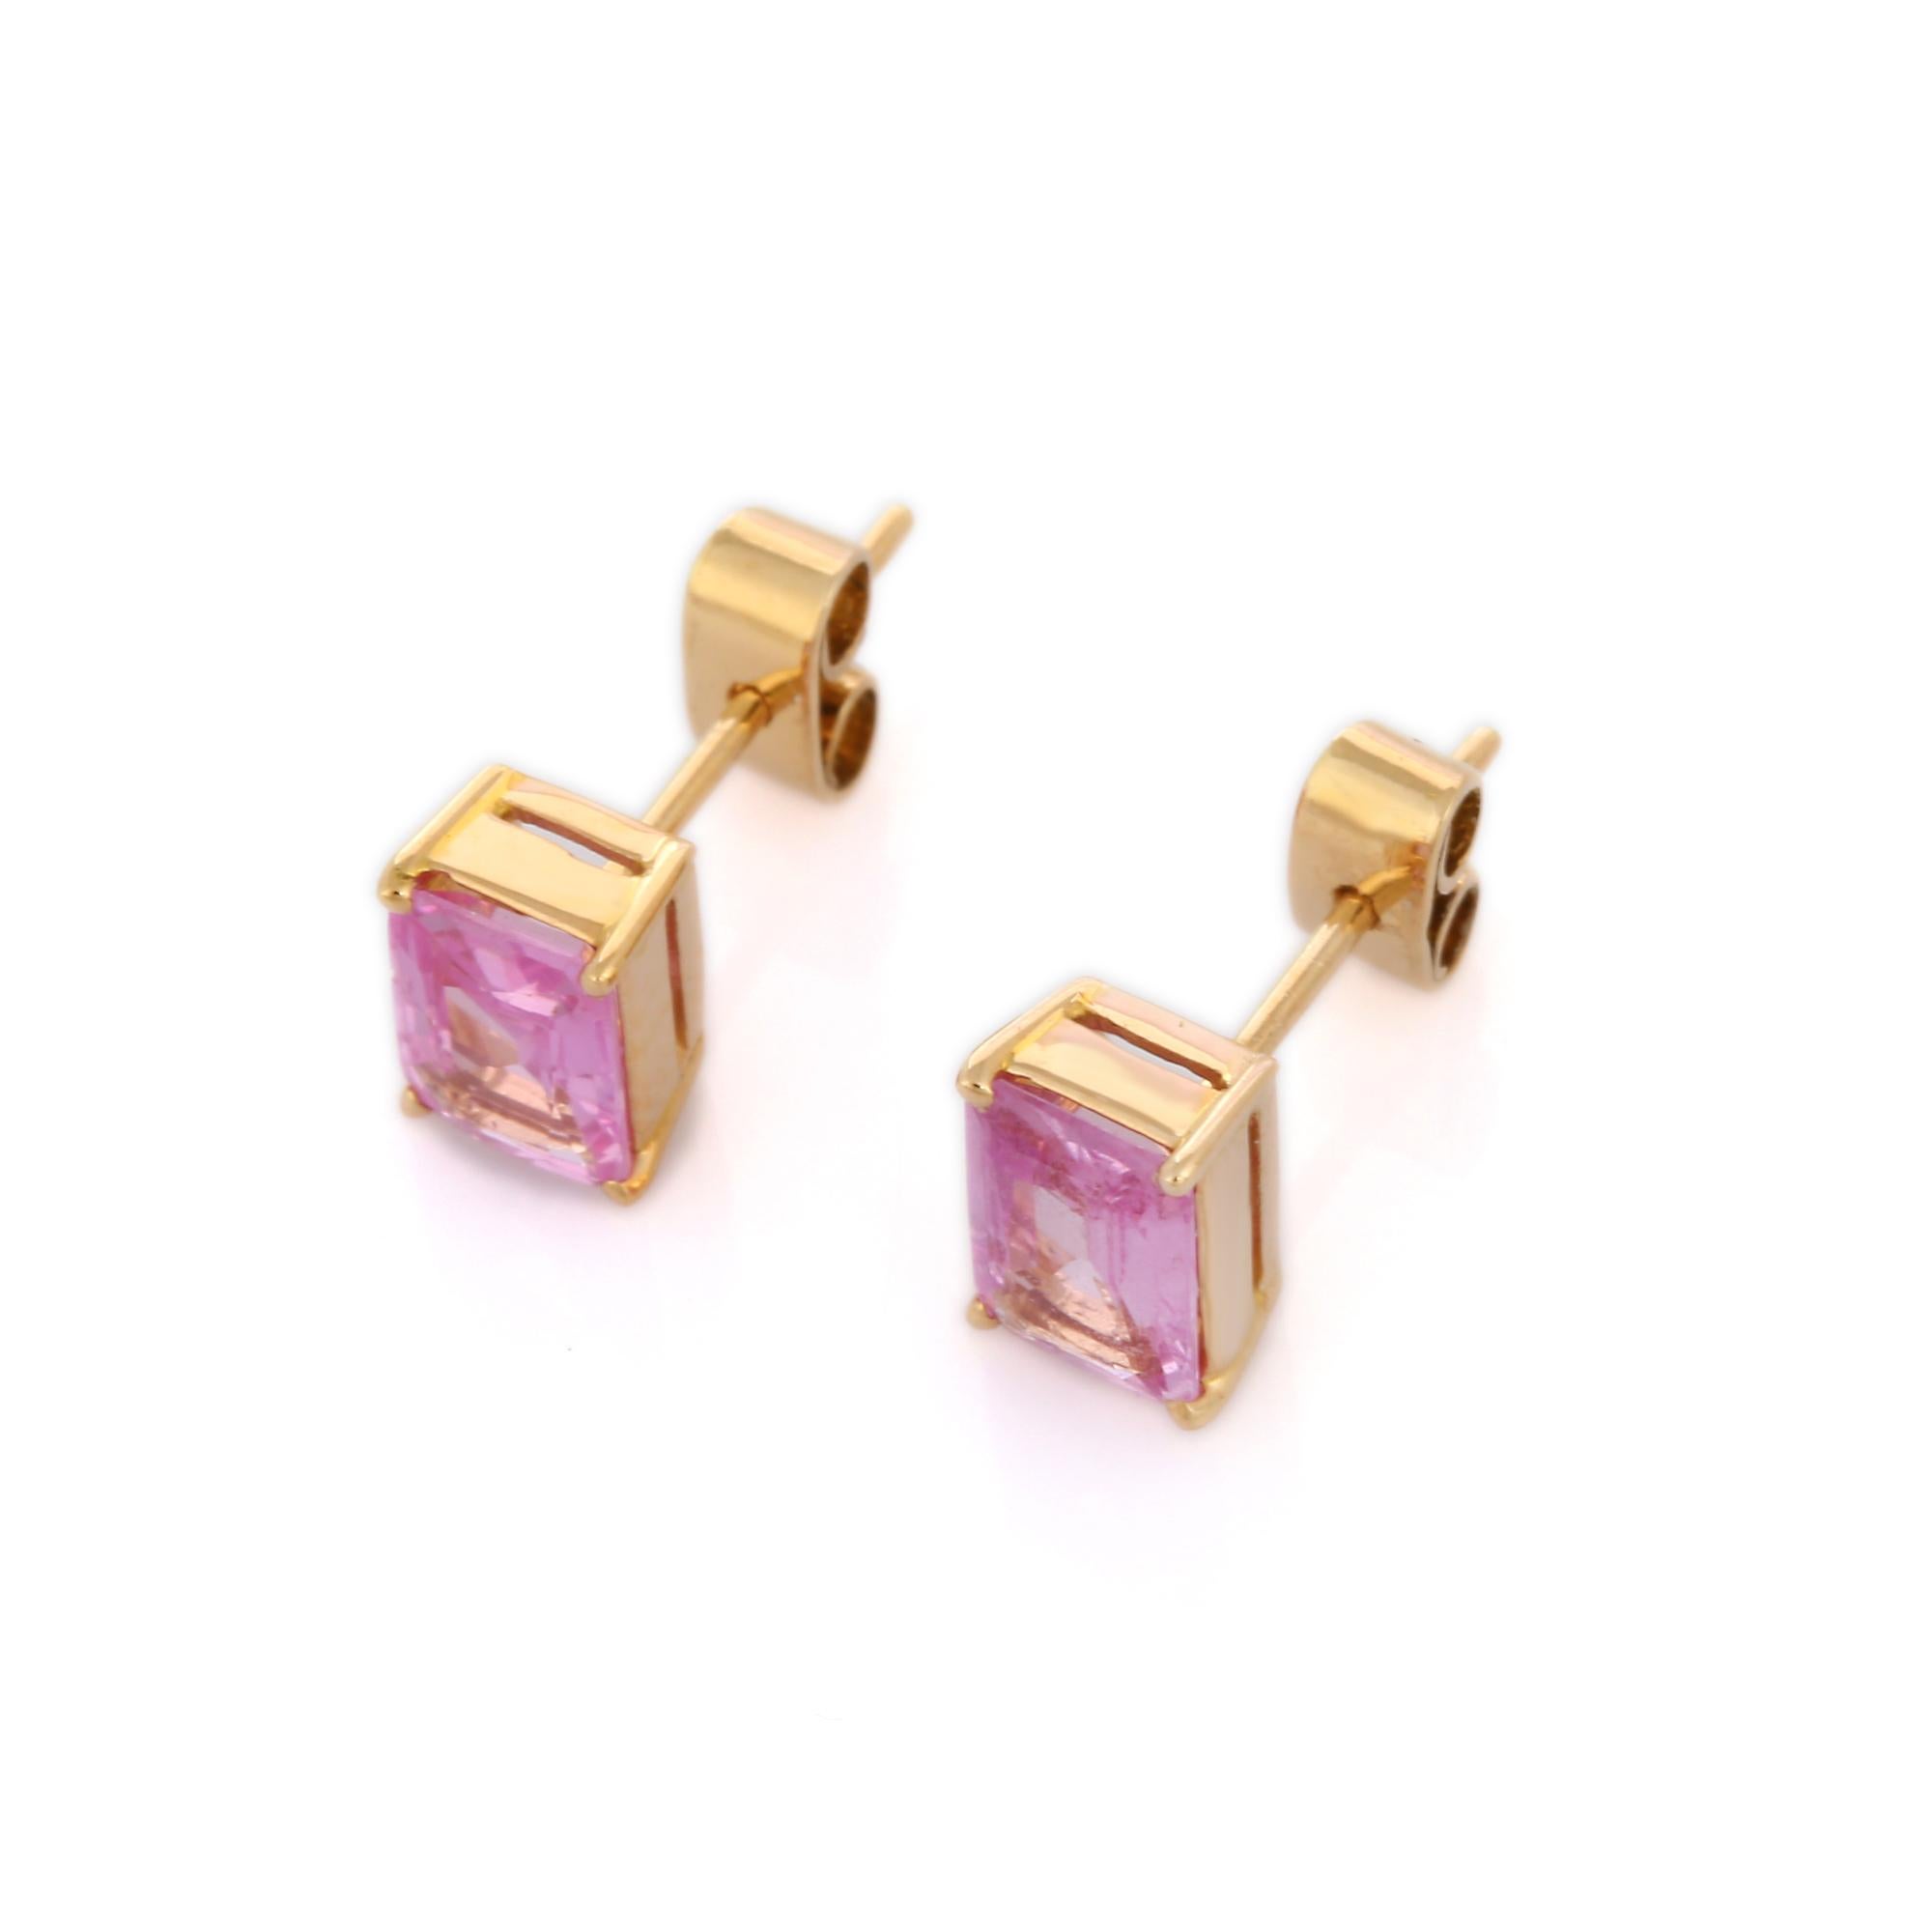 Studs create a subtle beauty while showcasing the colors of the natural precious gemstones making a statement.

Octagon cut pink sapphire studs in 18K gold. Embrace your look with these stunning pair of earrings suitable for any occasion to complete